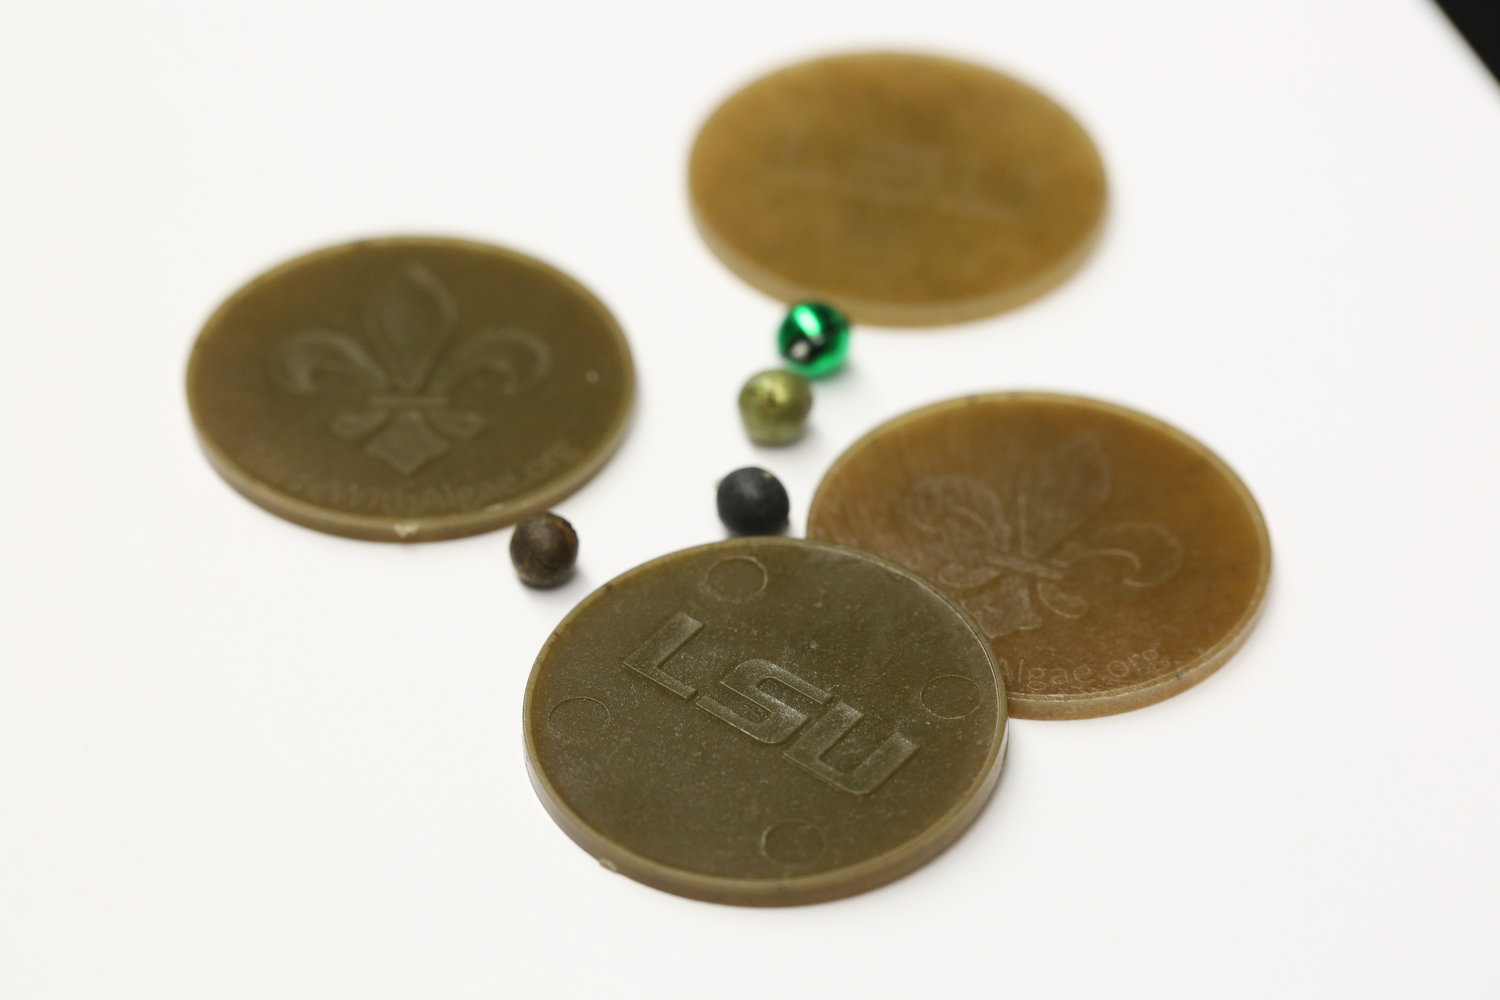 Biodegradable beads and doubloons developed at LSU